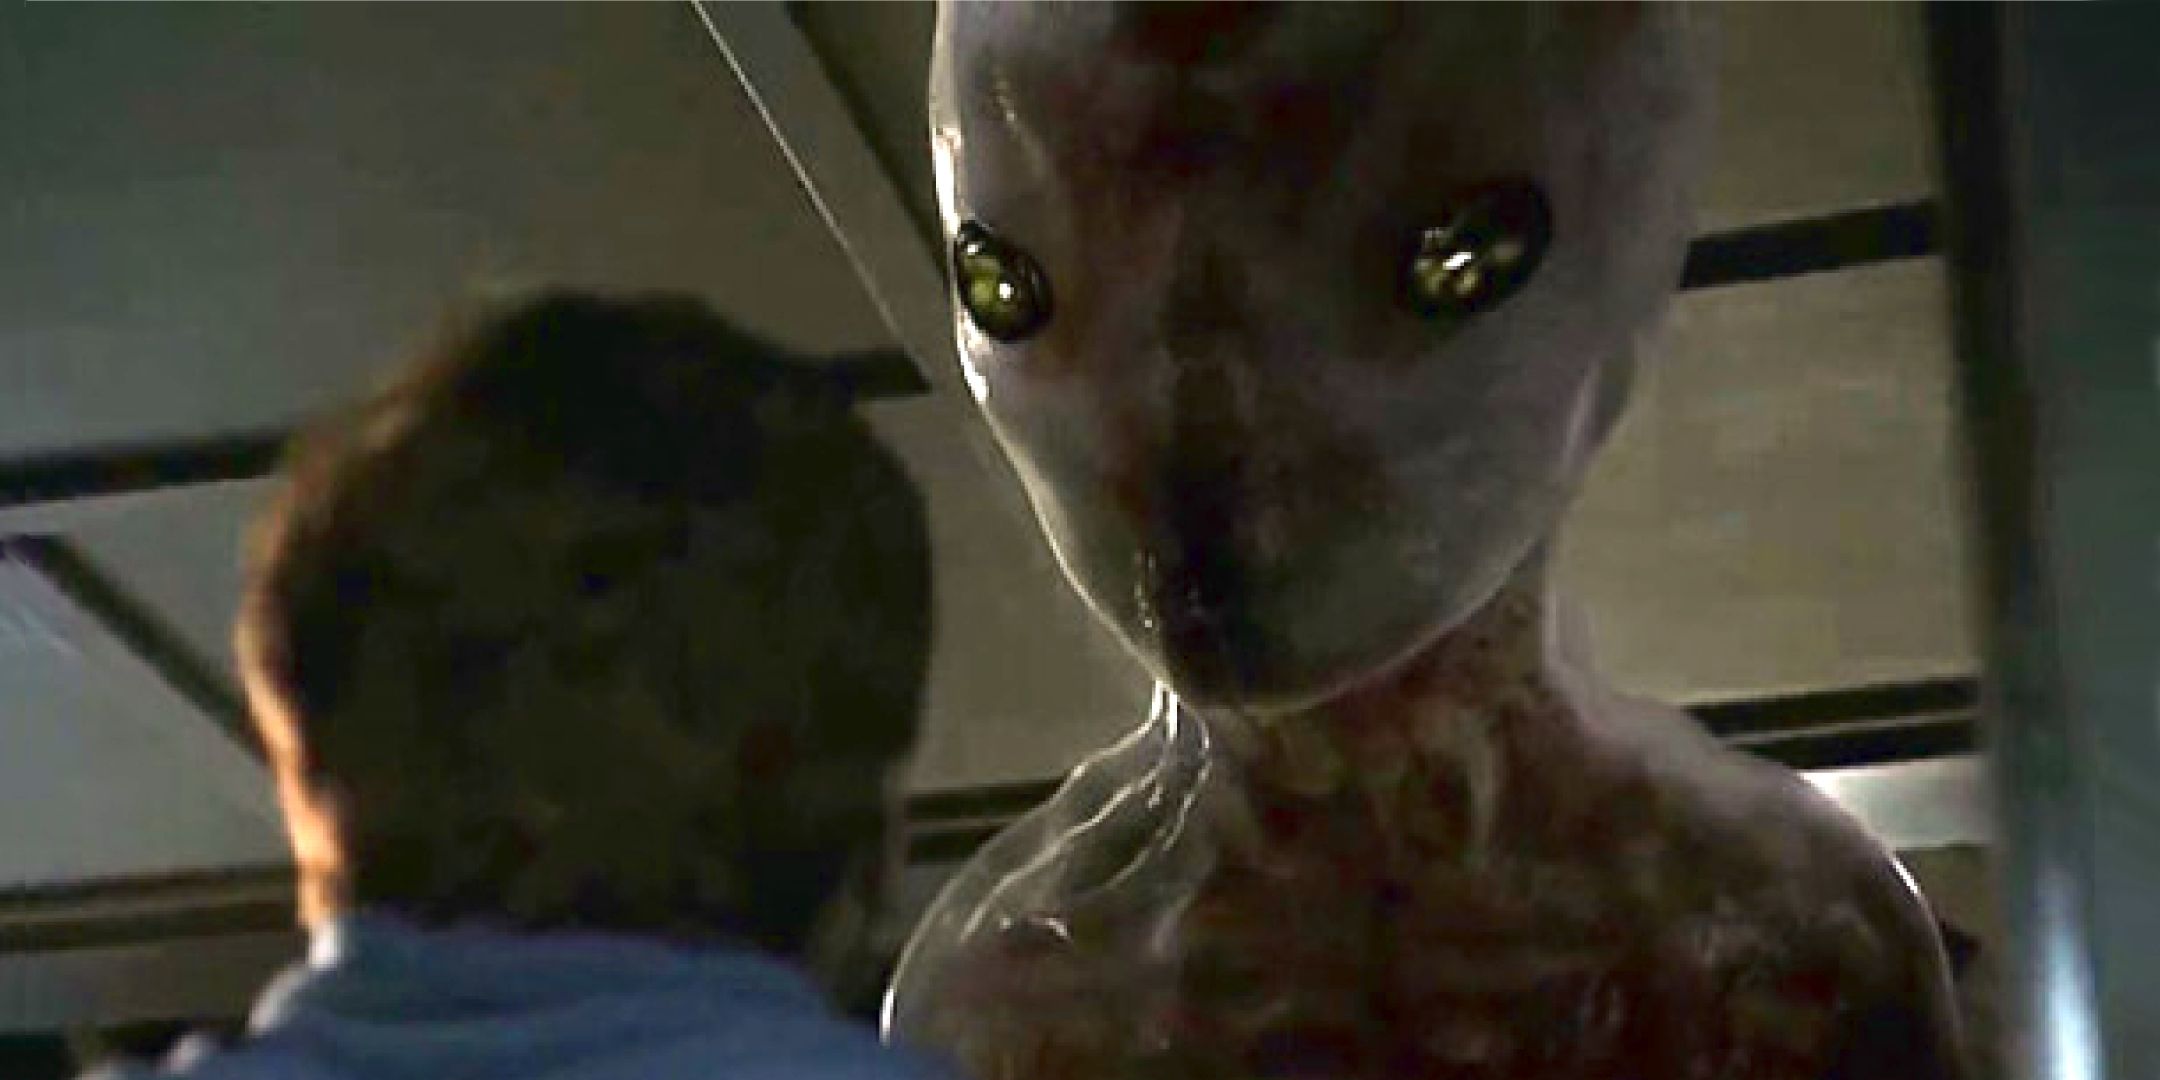 A large gray alien towering over a man with an expressionless face in Stephen King's Dreamcatcher movie.